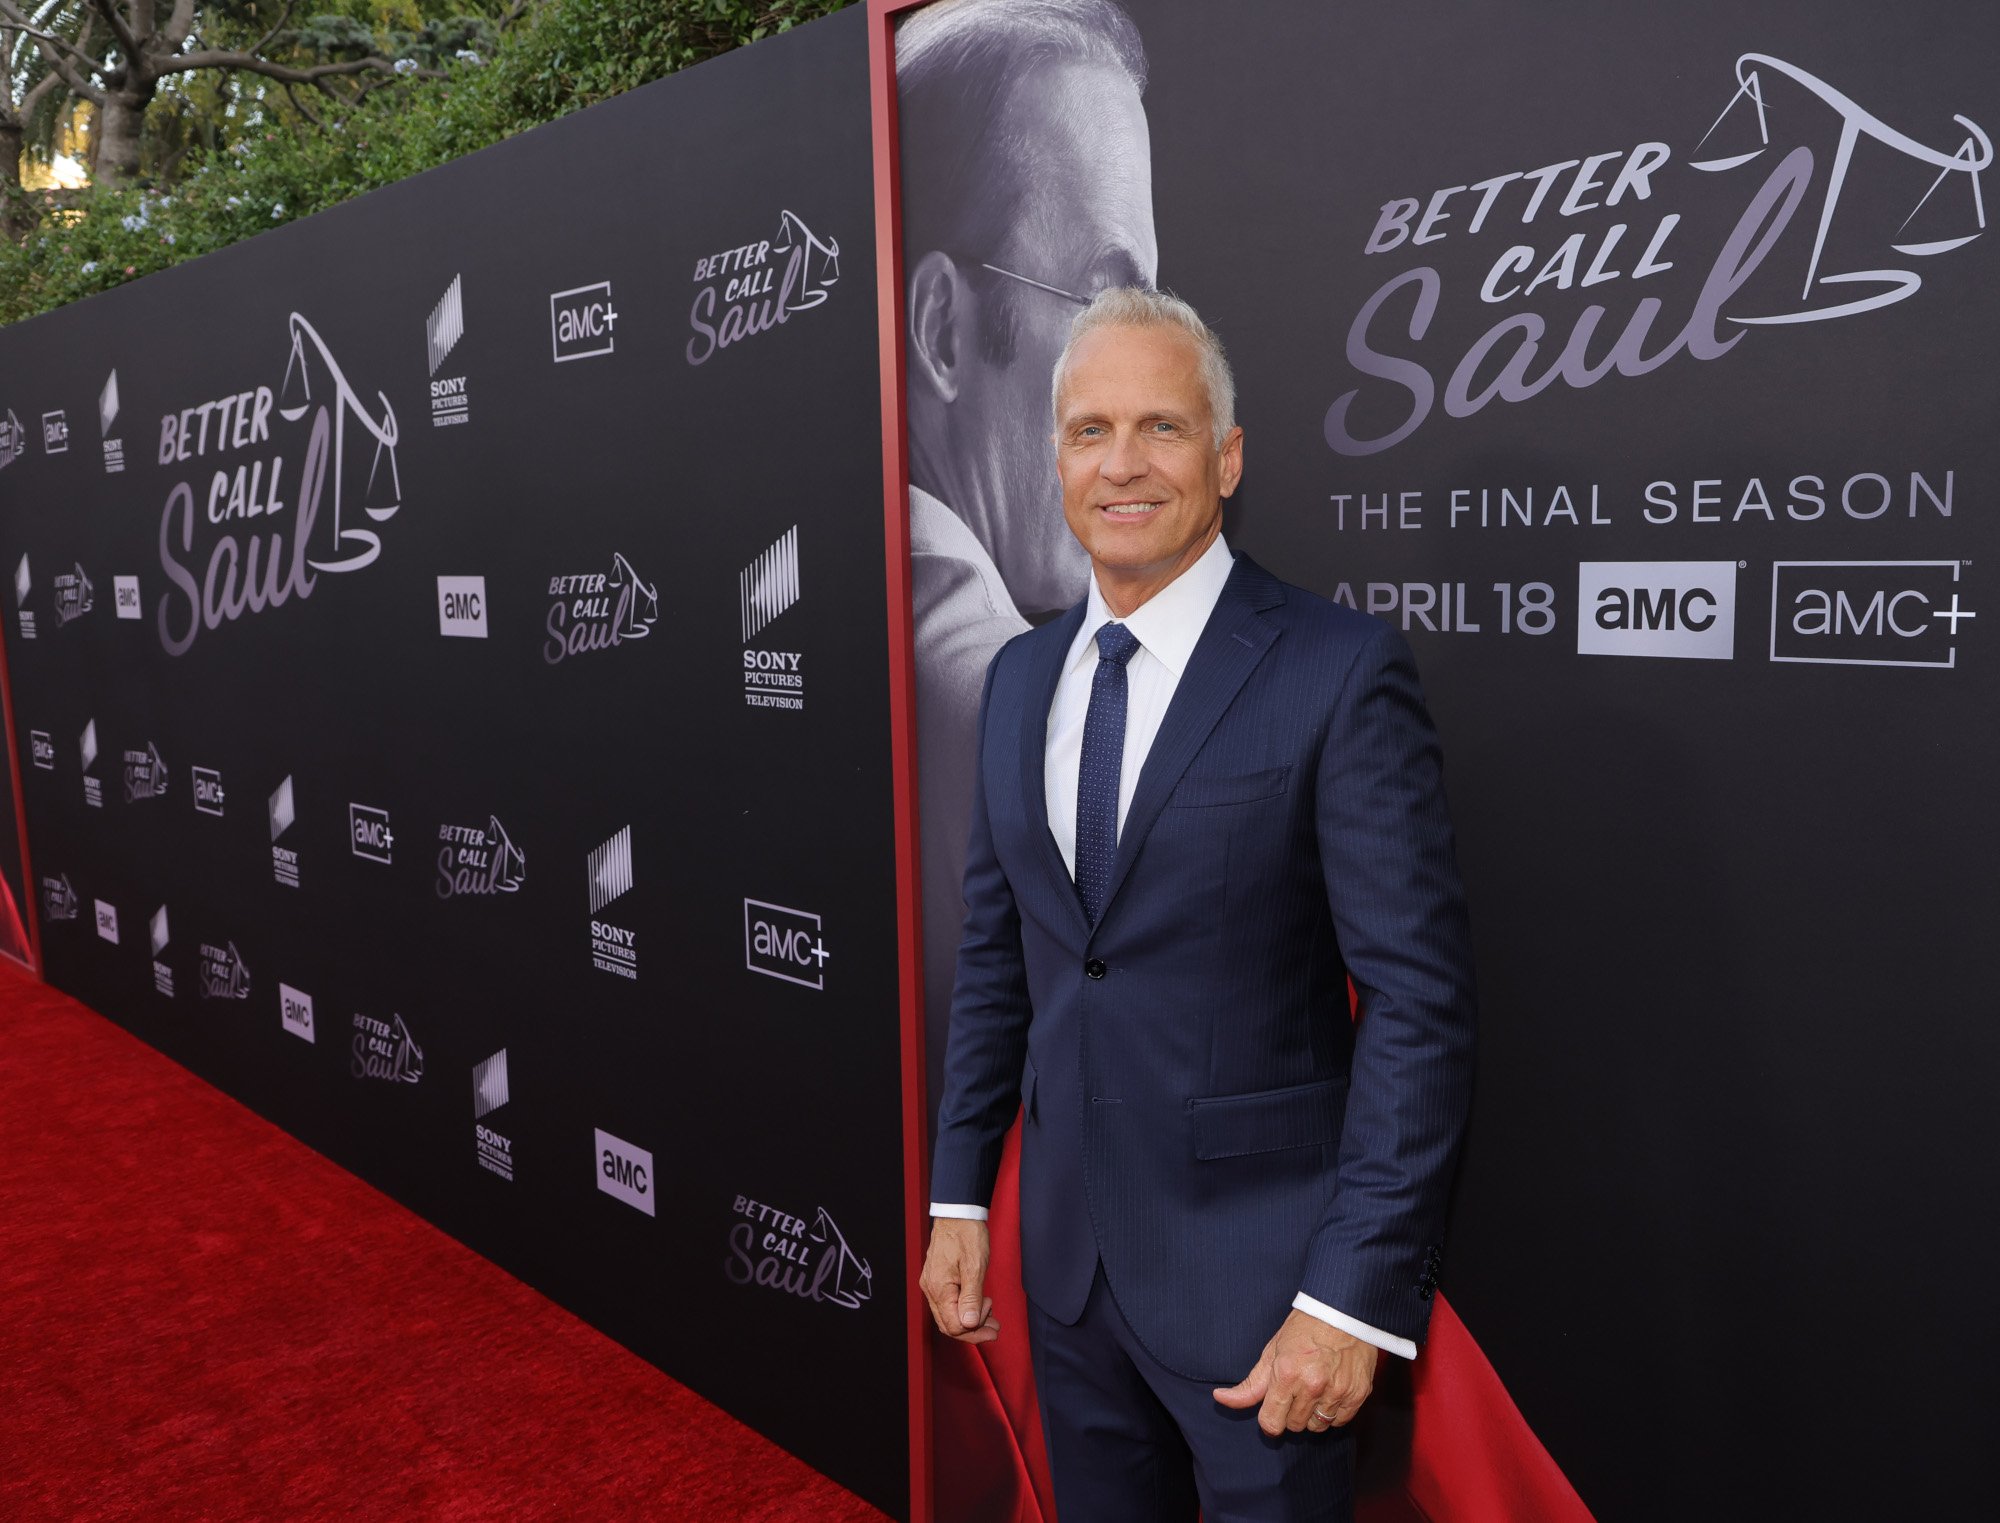 Patrick Fabian at the premiere for 'Better Call Saul' Season 6. He's wearing a suit and standing in front of a wall with Bob Odenkirk on it.